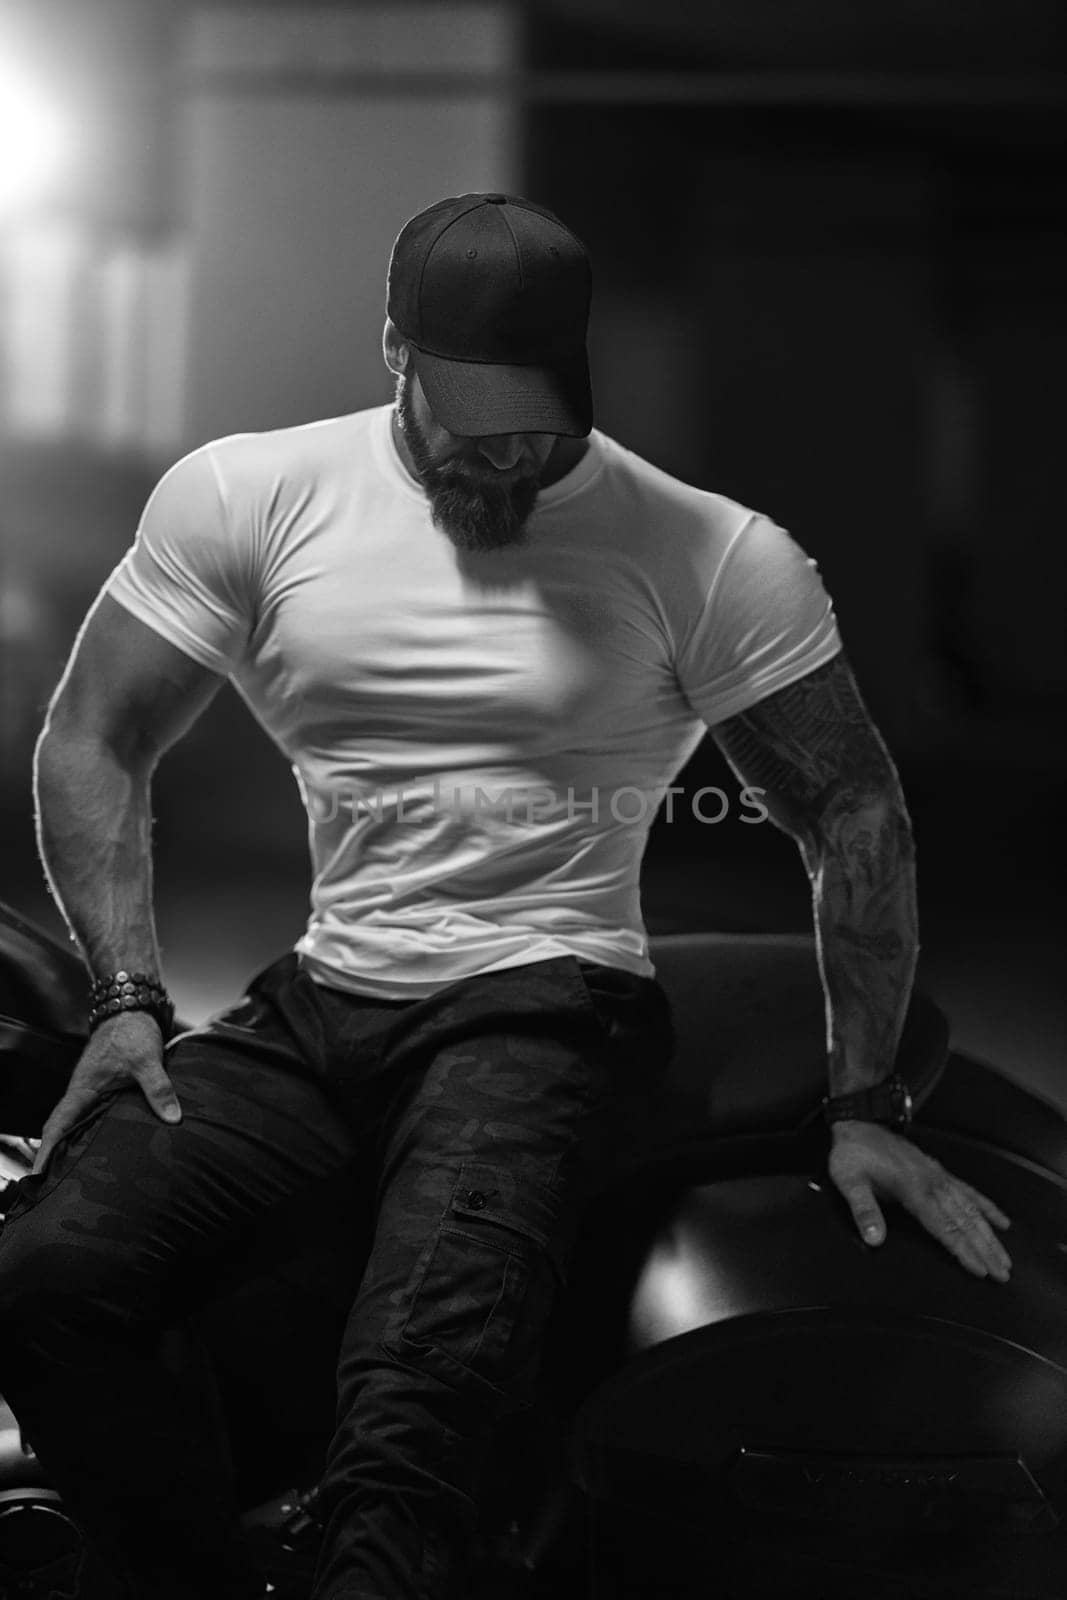 Sexy handsome attractive sporty muscular fitness model breaded biker in black cap and white tight tshirt sits on brutal beautiful motorcycle in the parking, black and white photo